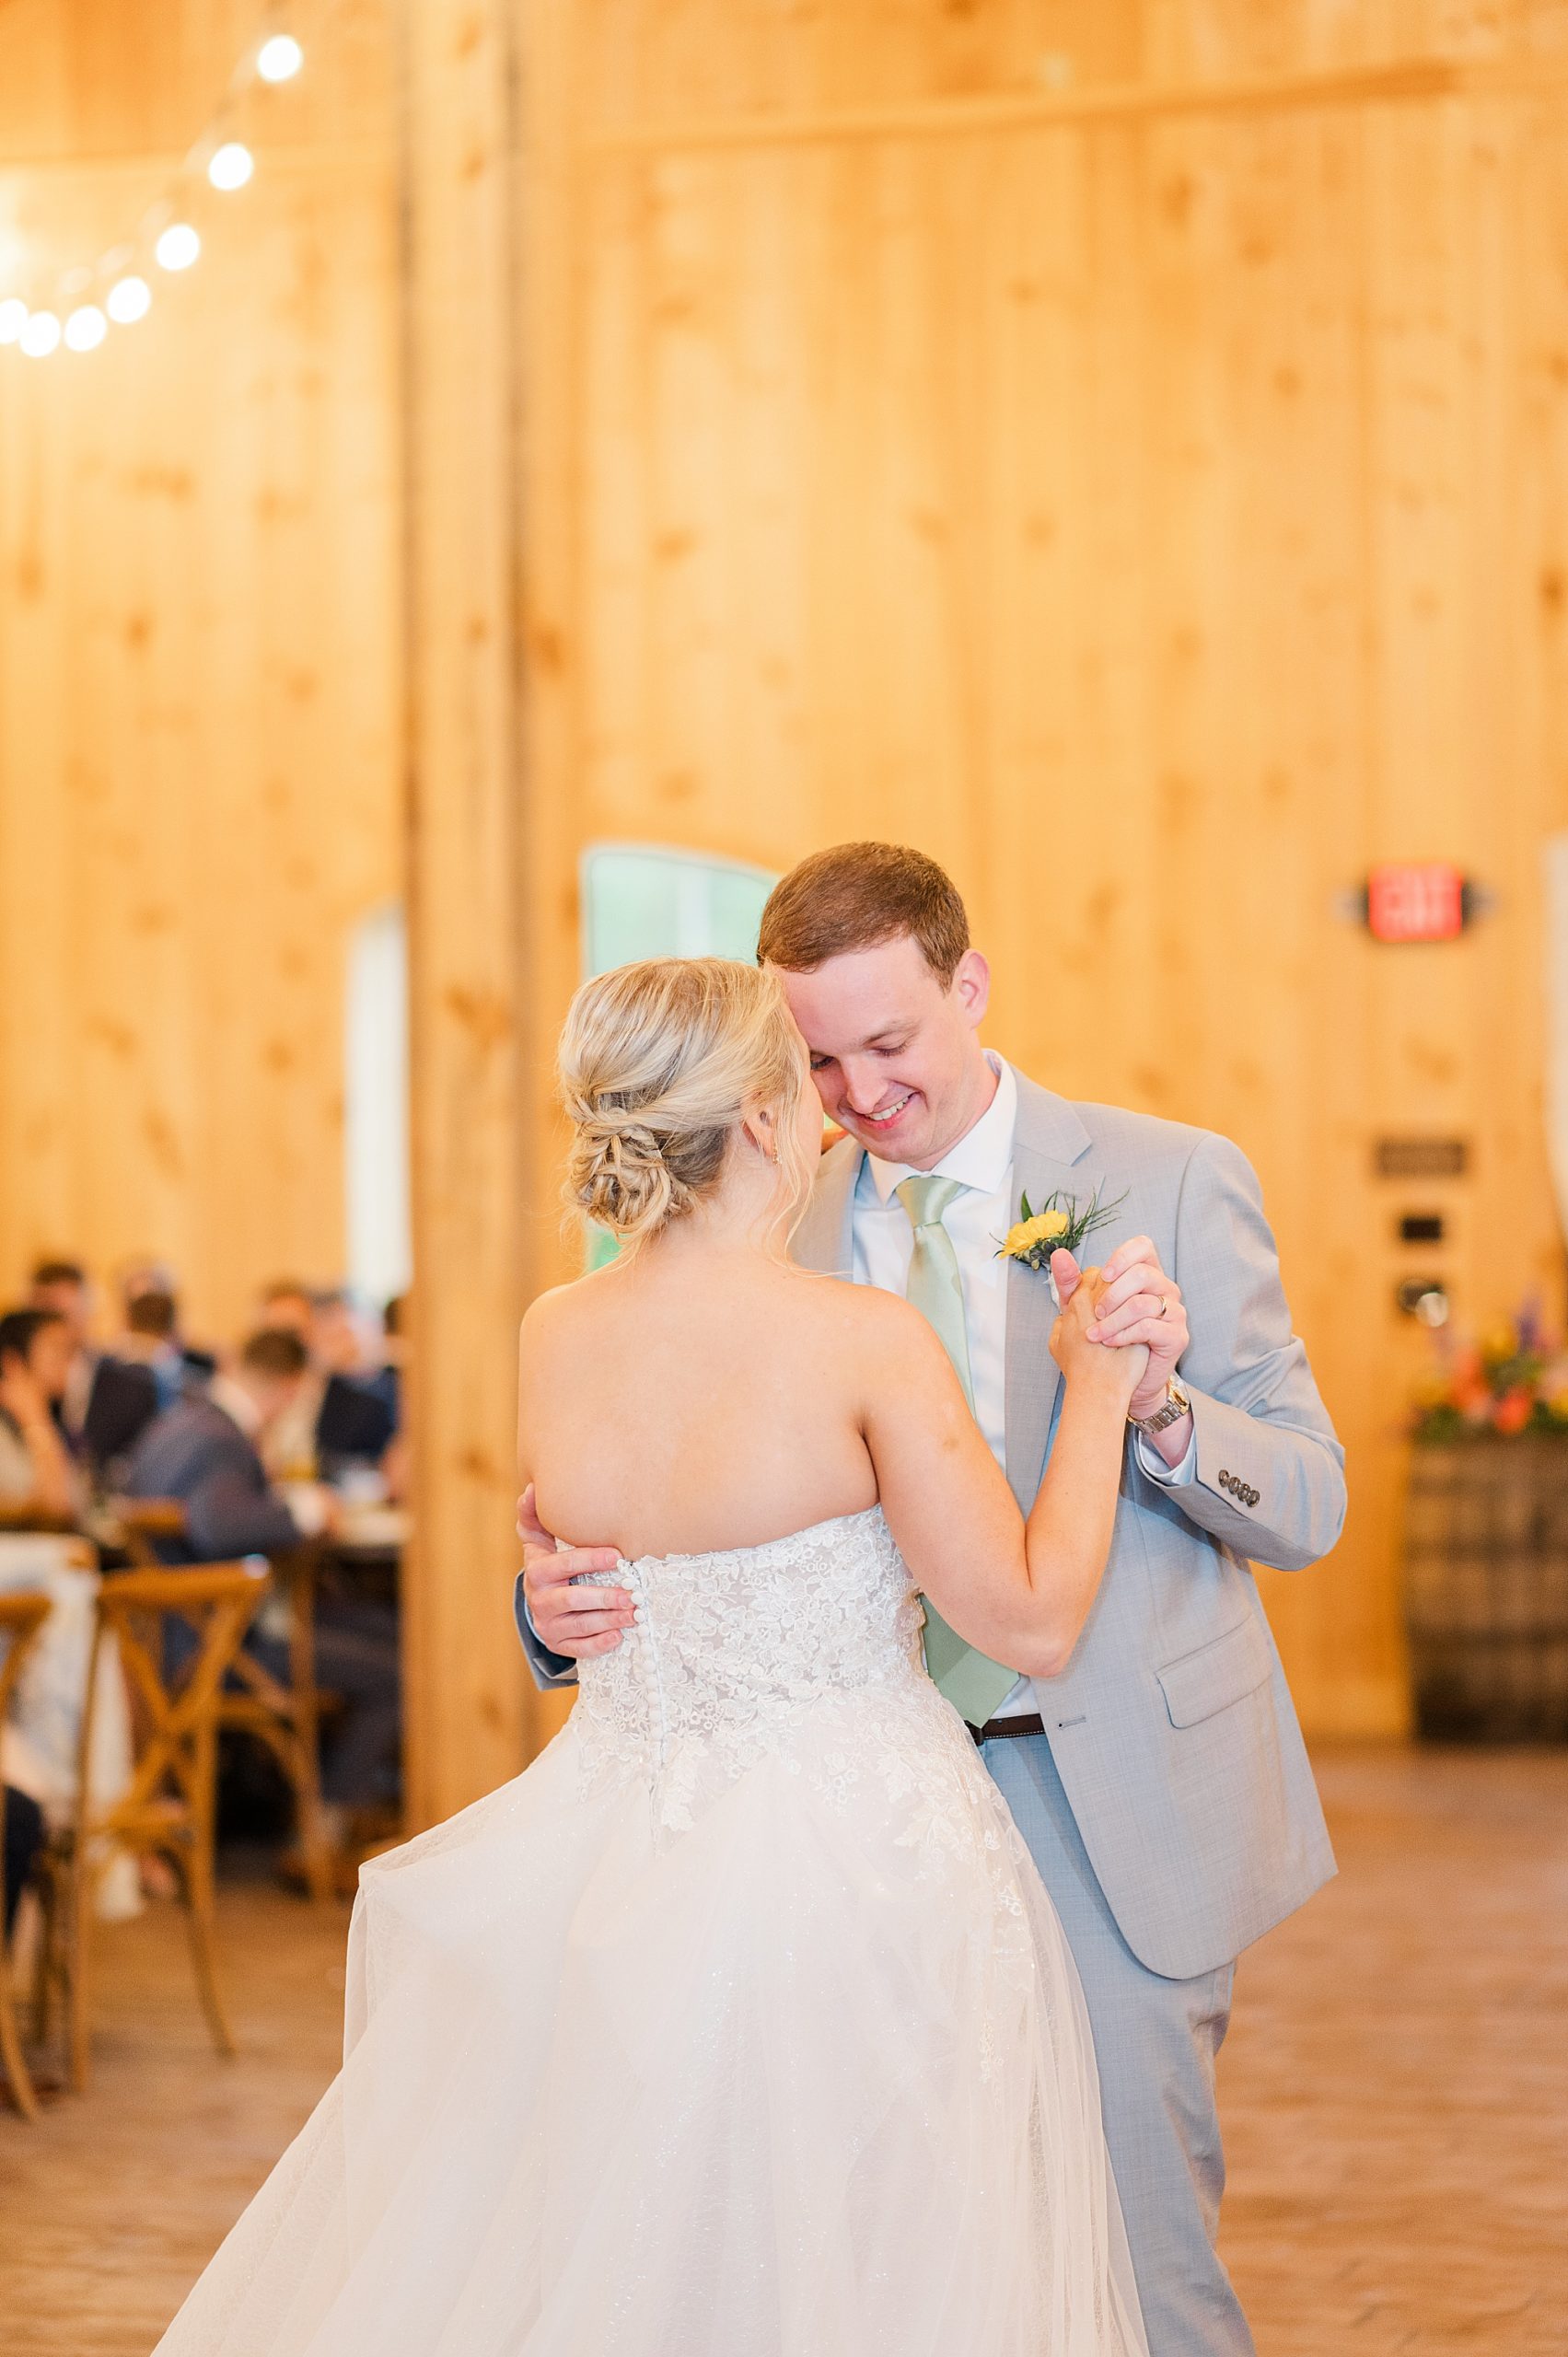 Bride and Groom First Dance at Barn at Timber Creek Wedding